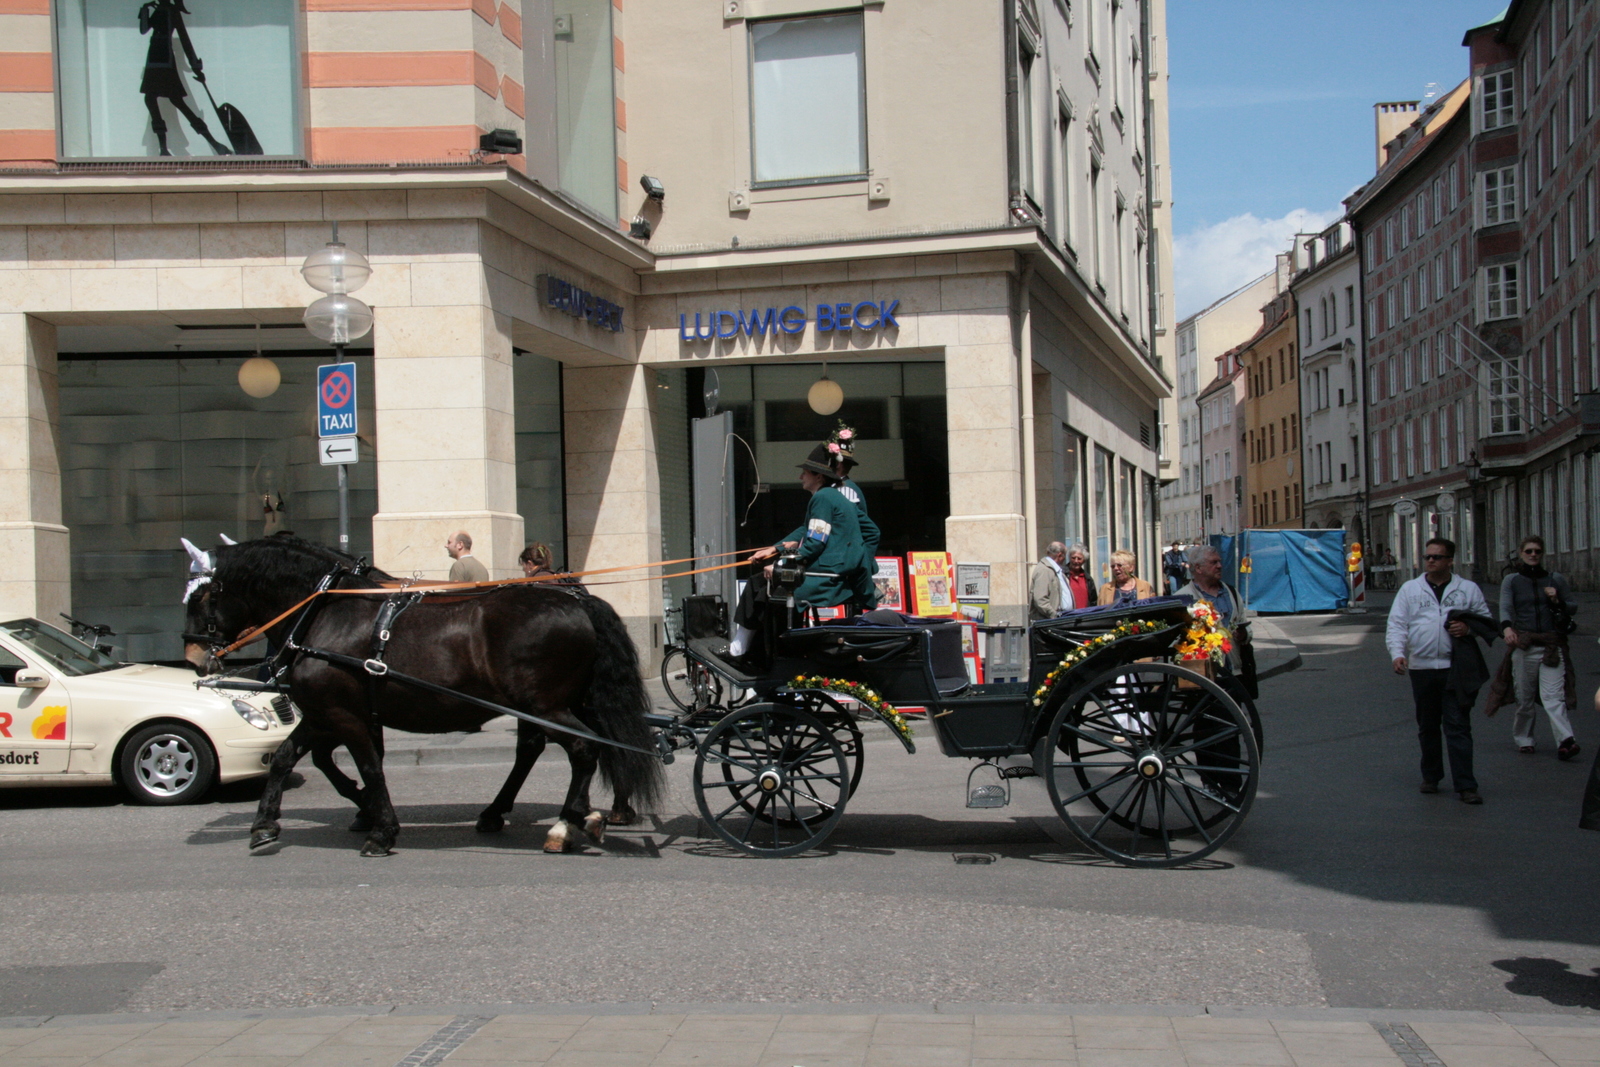 [Picture: Horse and cart]